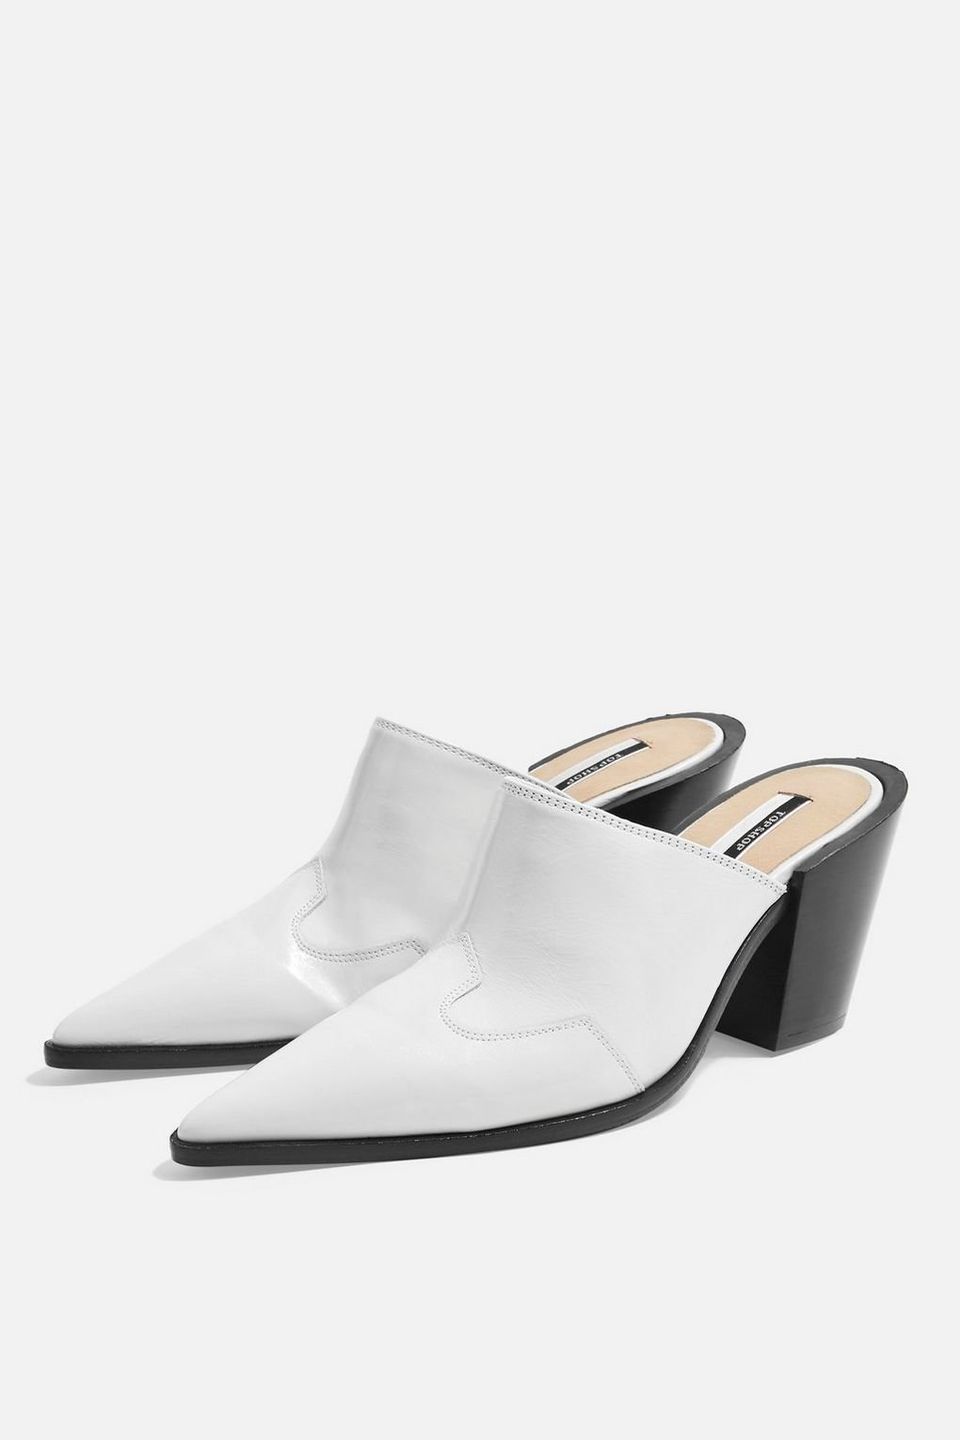 18 Must-Have Pointed-Toe Mules To Slip Into This Spring | HuffPost Life